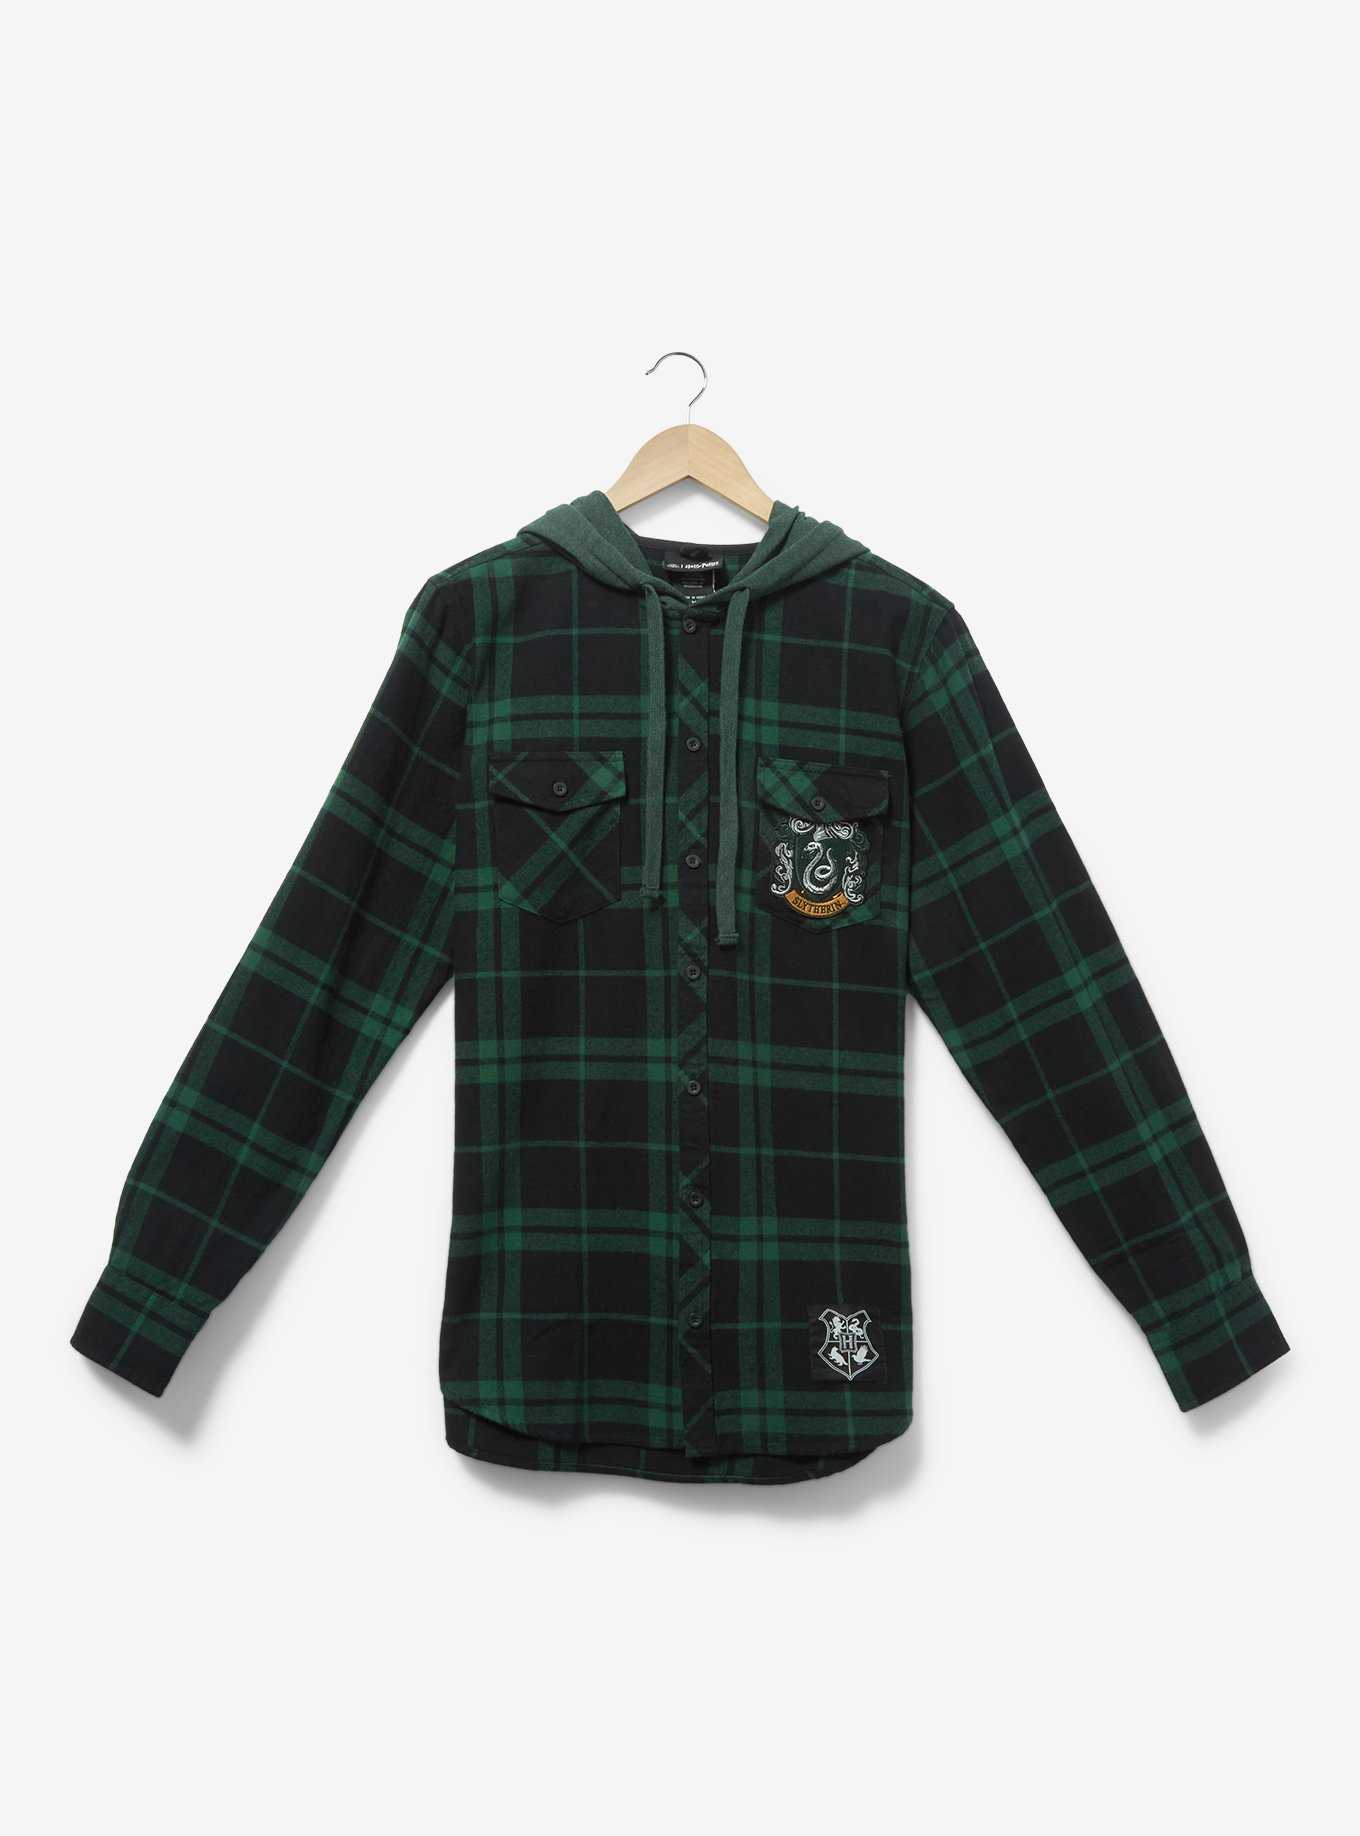 The Best Slytherin Gifts: 20+ Pieces of Slytherin Merch You Need ASAP!